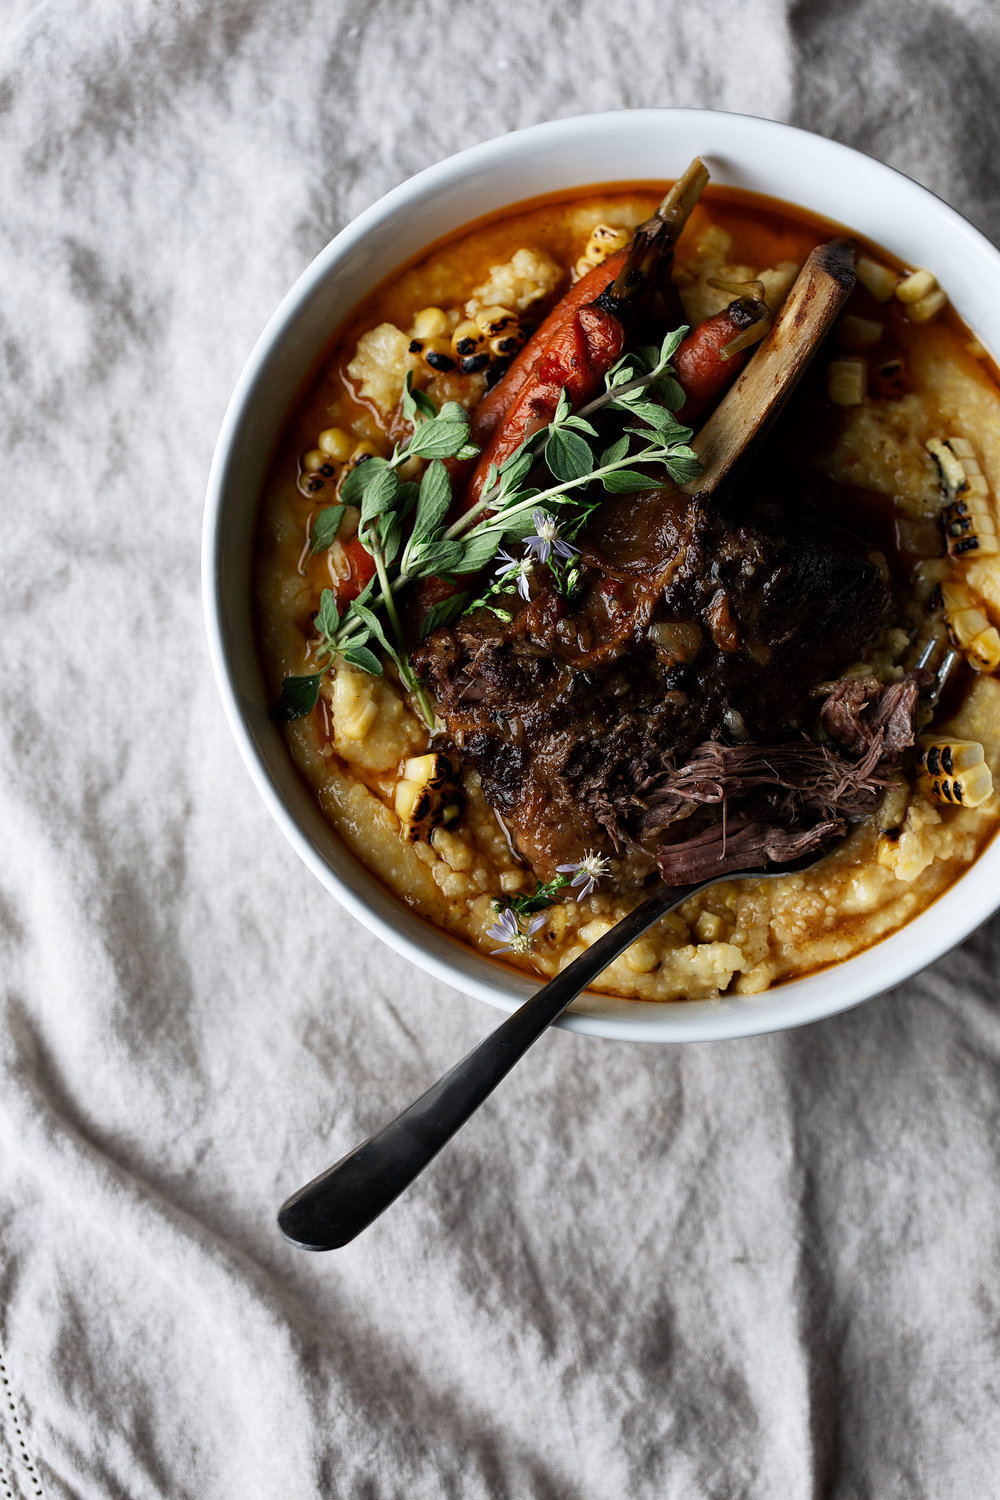 Chili Braised Short Ribs with Carrots and Charred Corn Polenta recipe in bowl